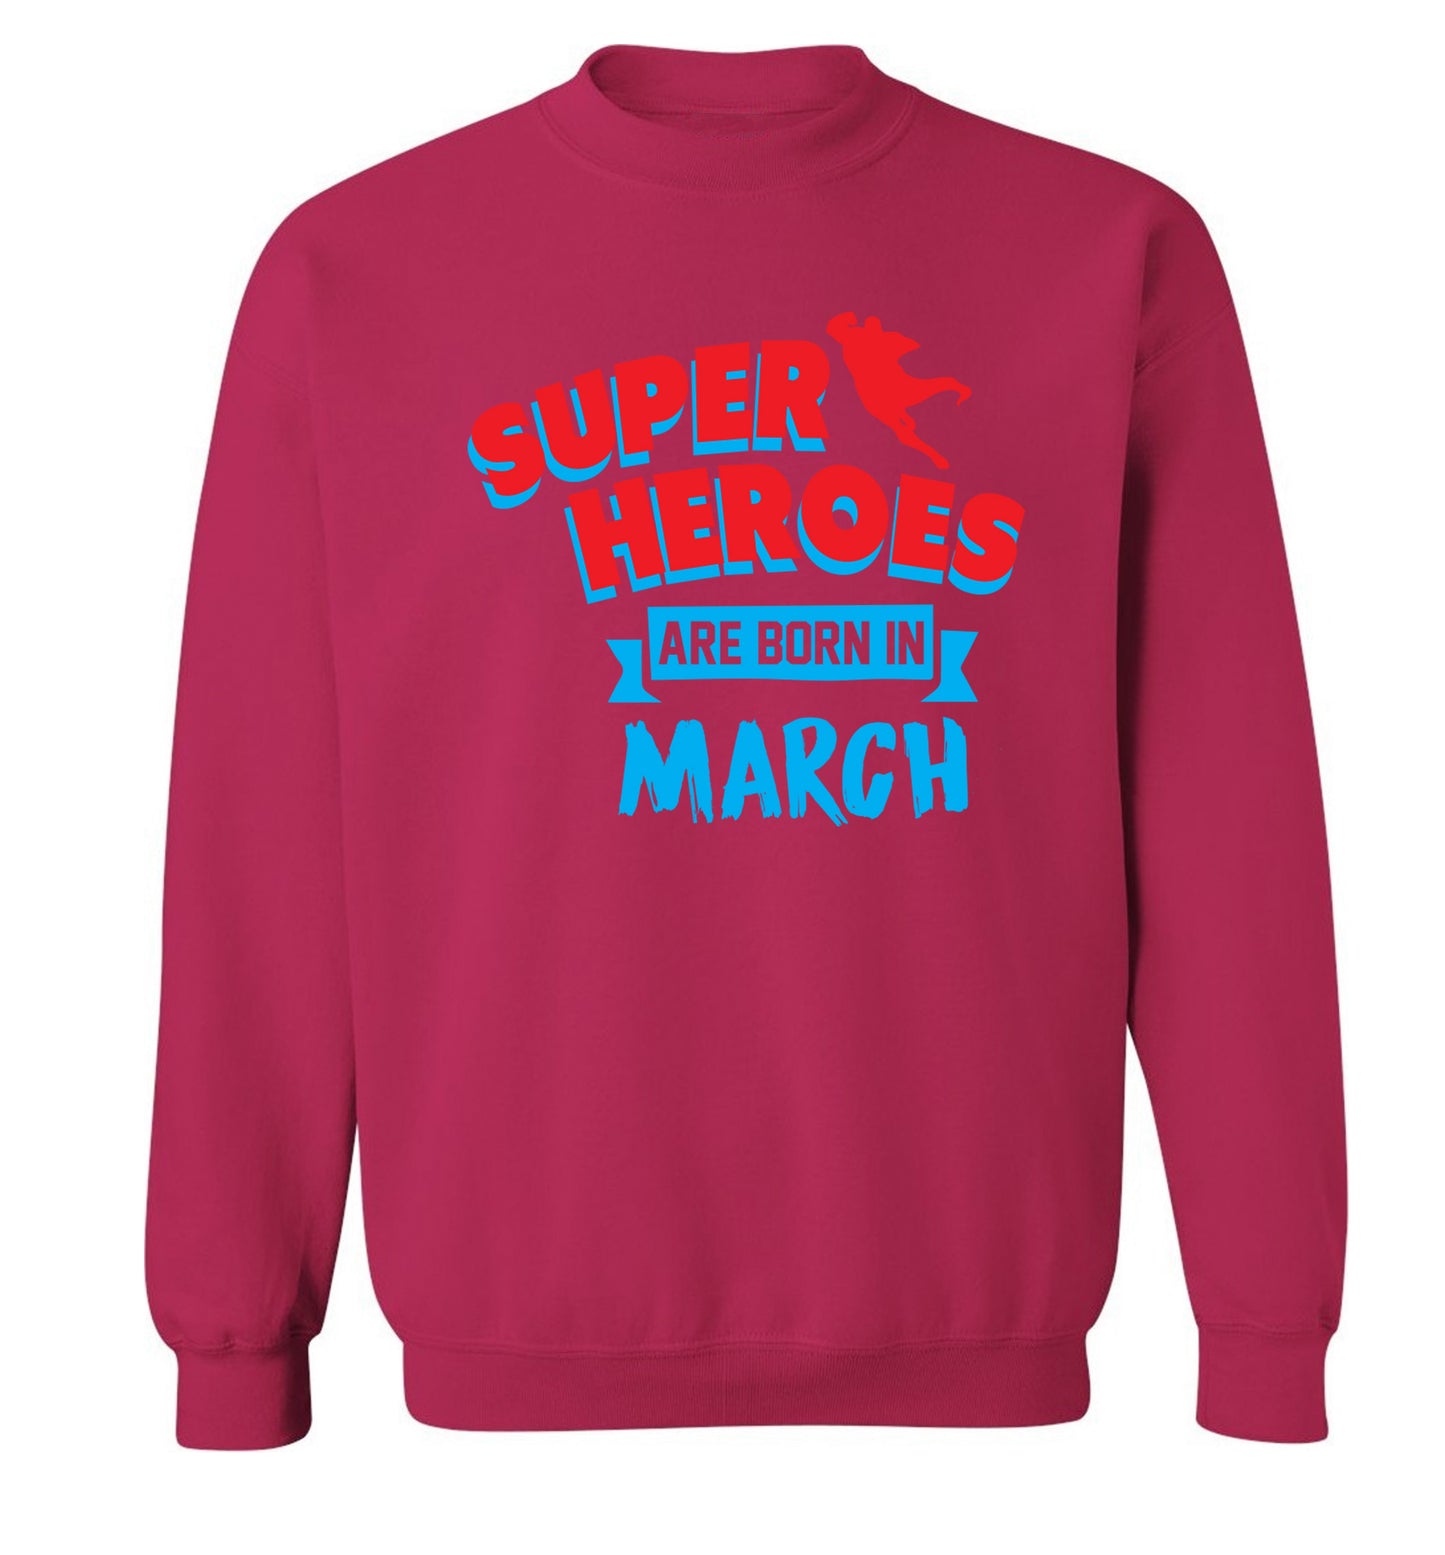 Superheros are born in March Adult's unisex pink Sweater 2XL